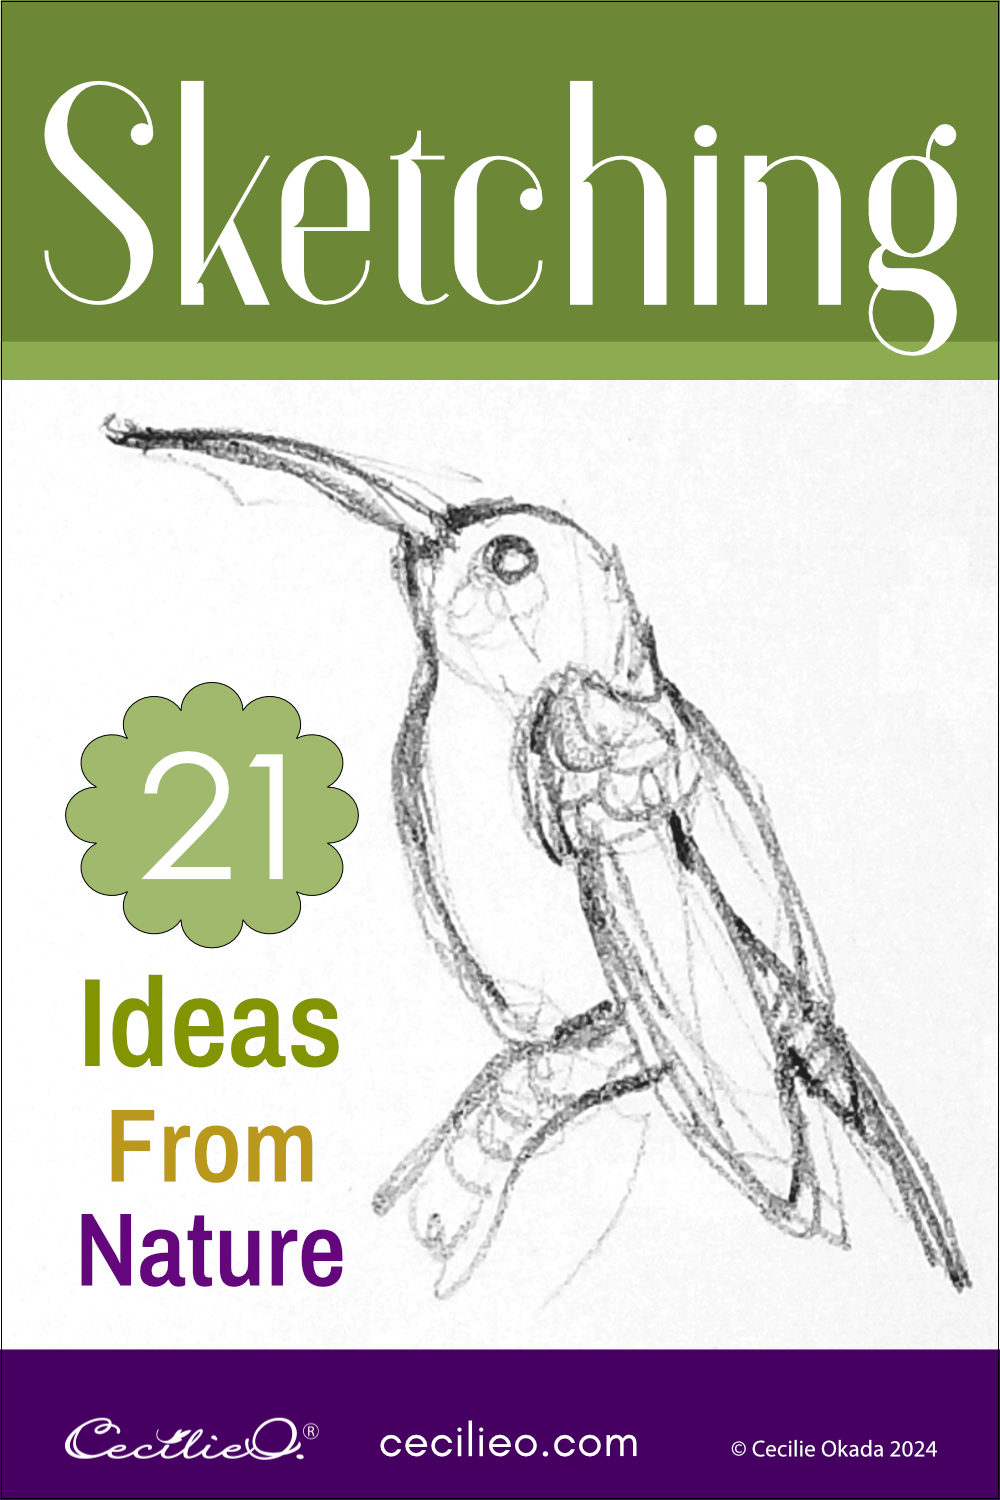 12 Easy Drawings for Beginners (Step-by-Step) - Smarty n'Crafty